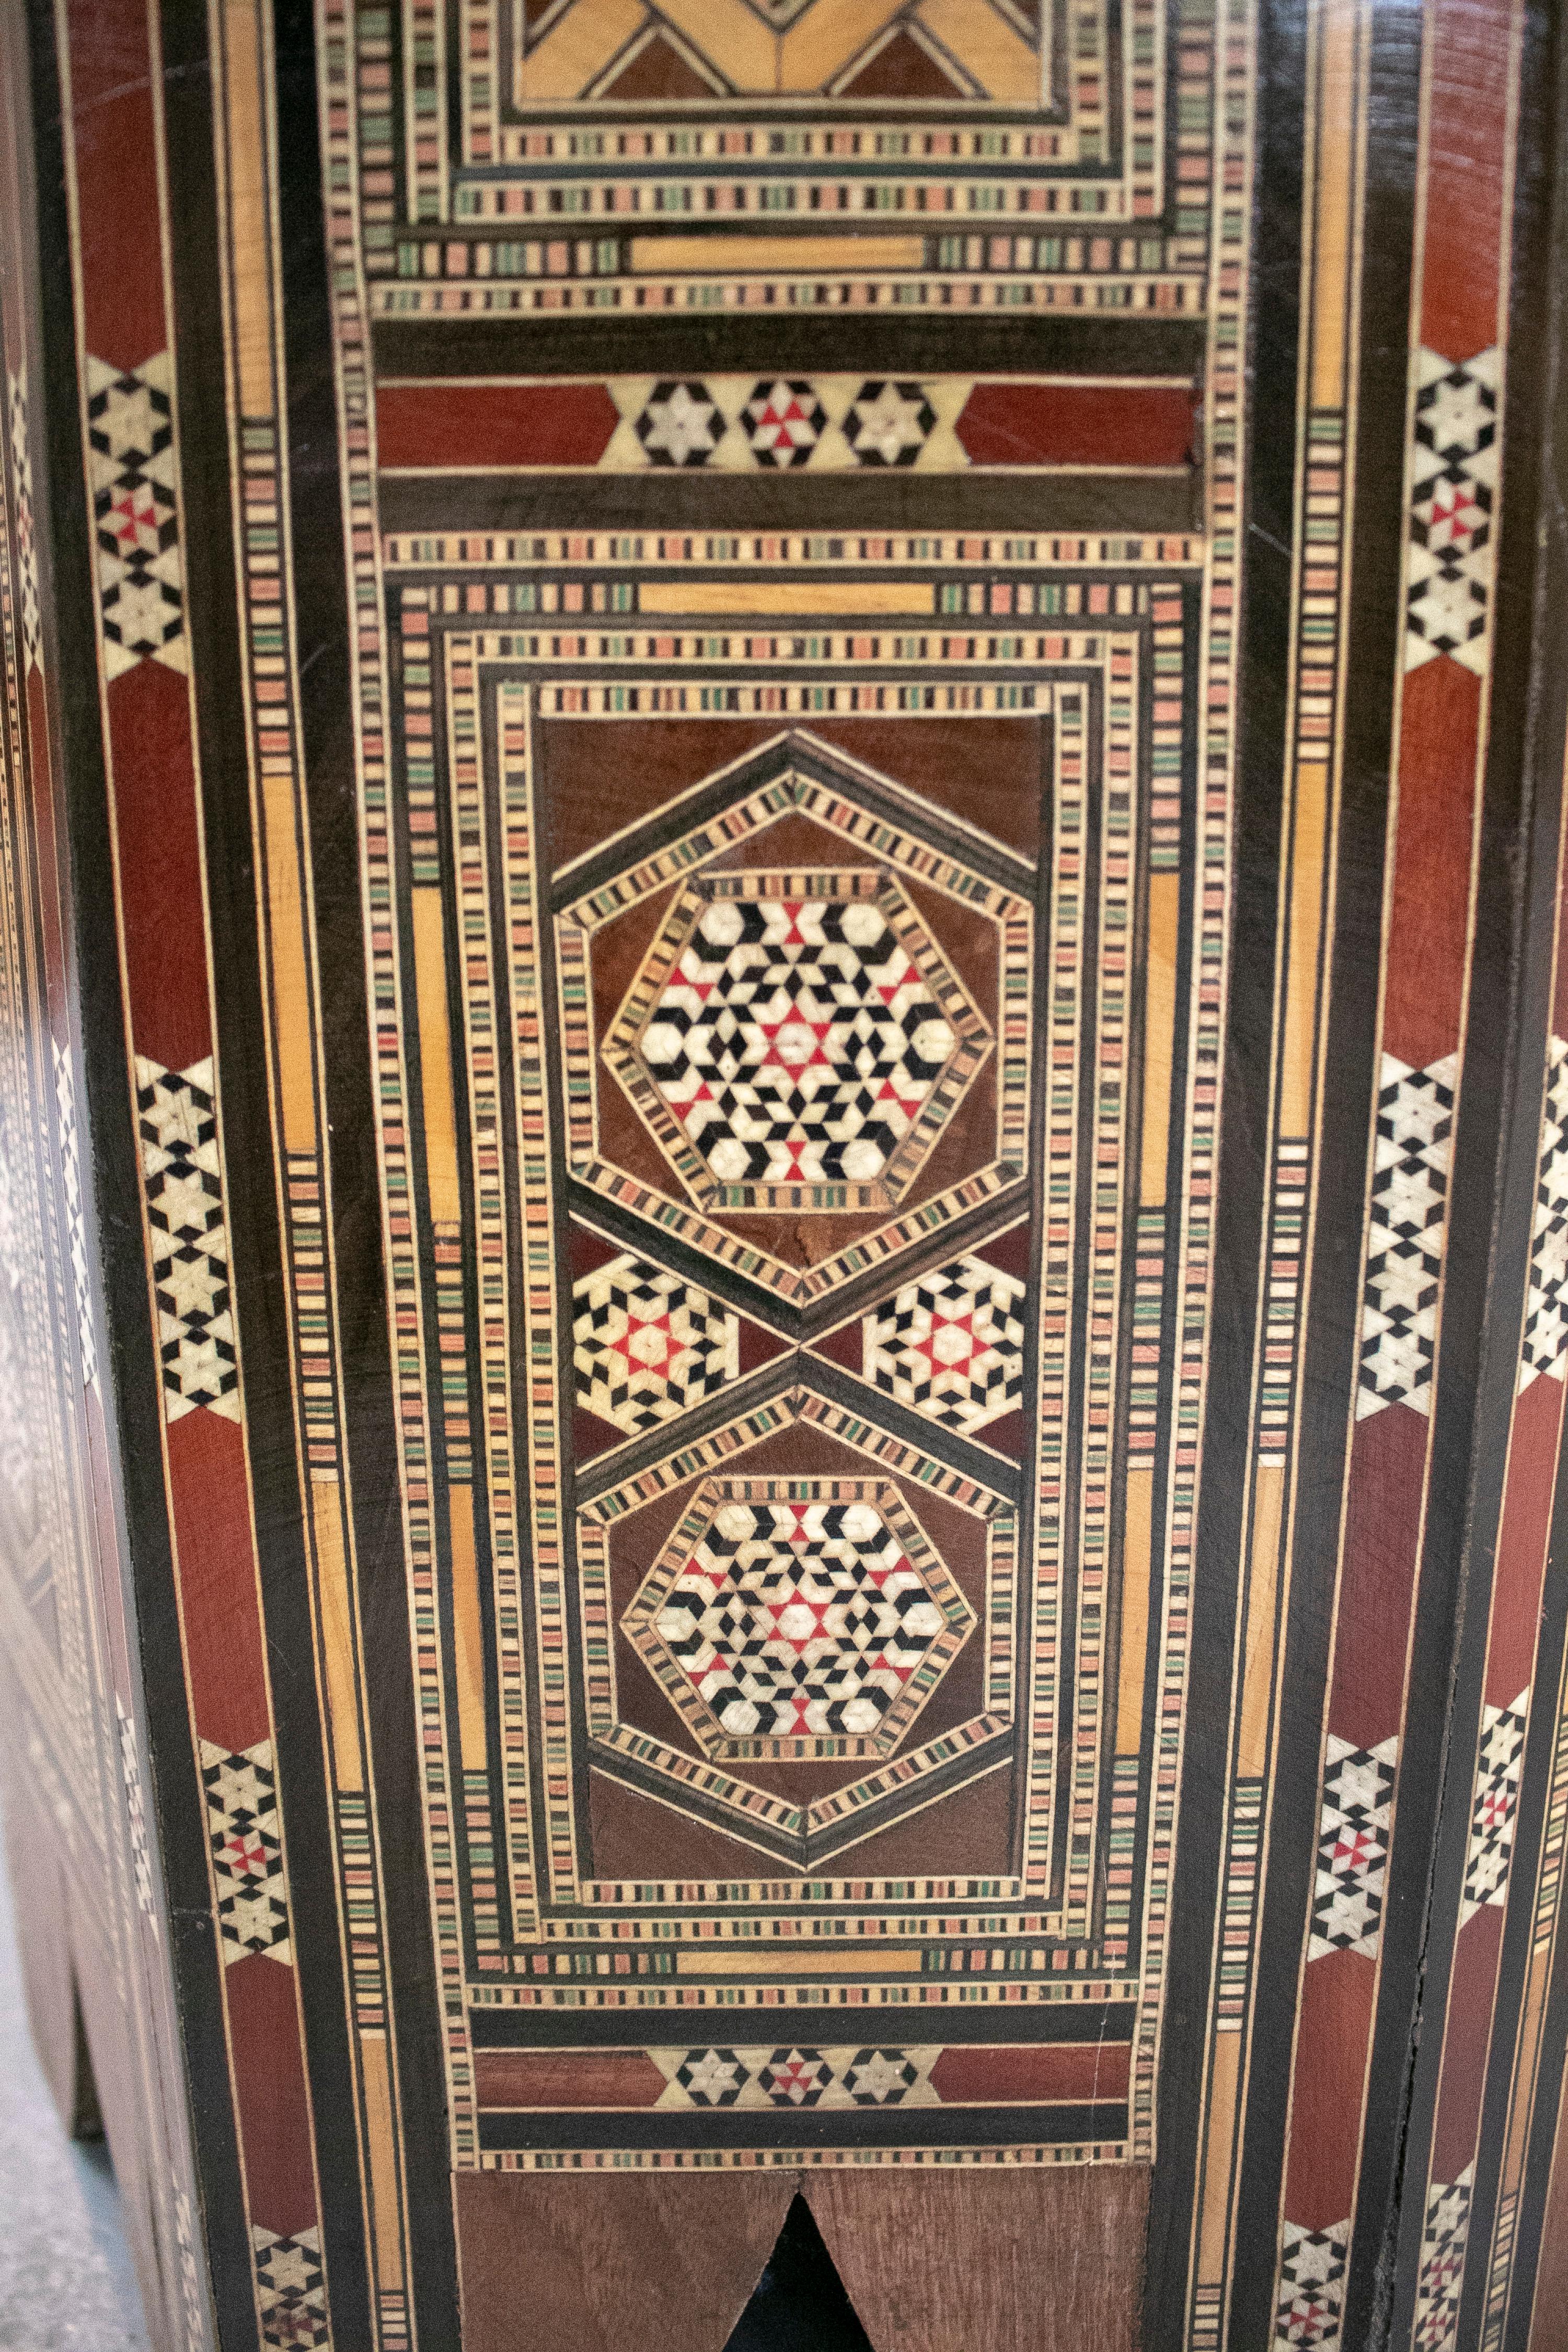 1980s Moroccan Inlay Wooden Table with Ornamental Geometric Decorations 12